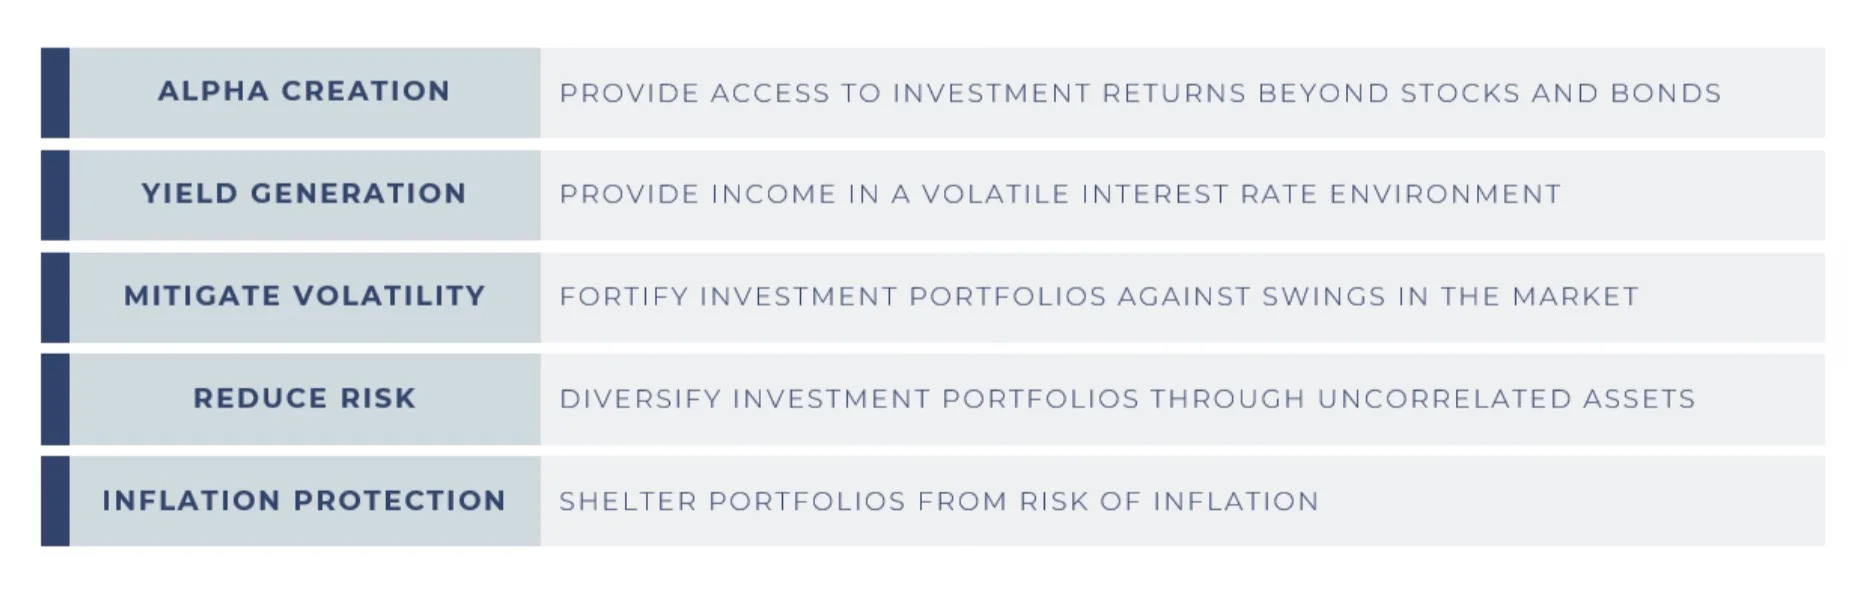 There are five reasons to consider adding alternatives to you portfolio and they include alpha creation, yield generation, mitigate volatility, reduce risk and inflation protection